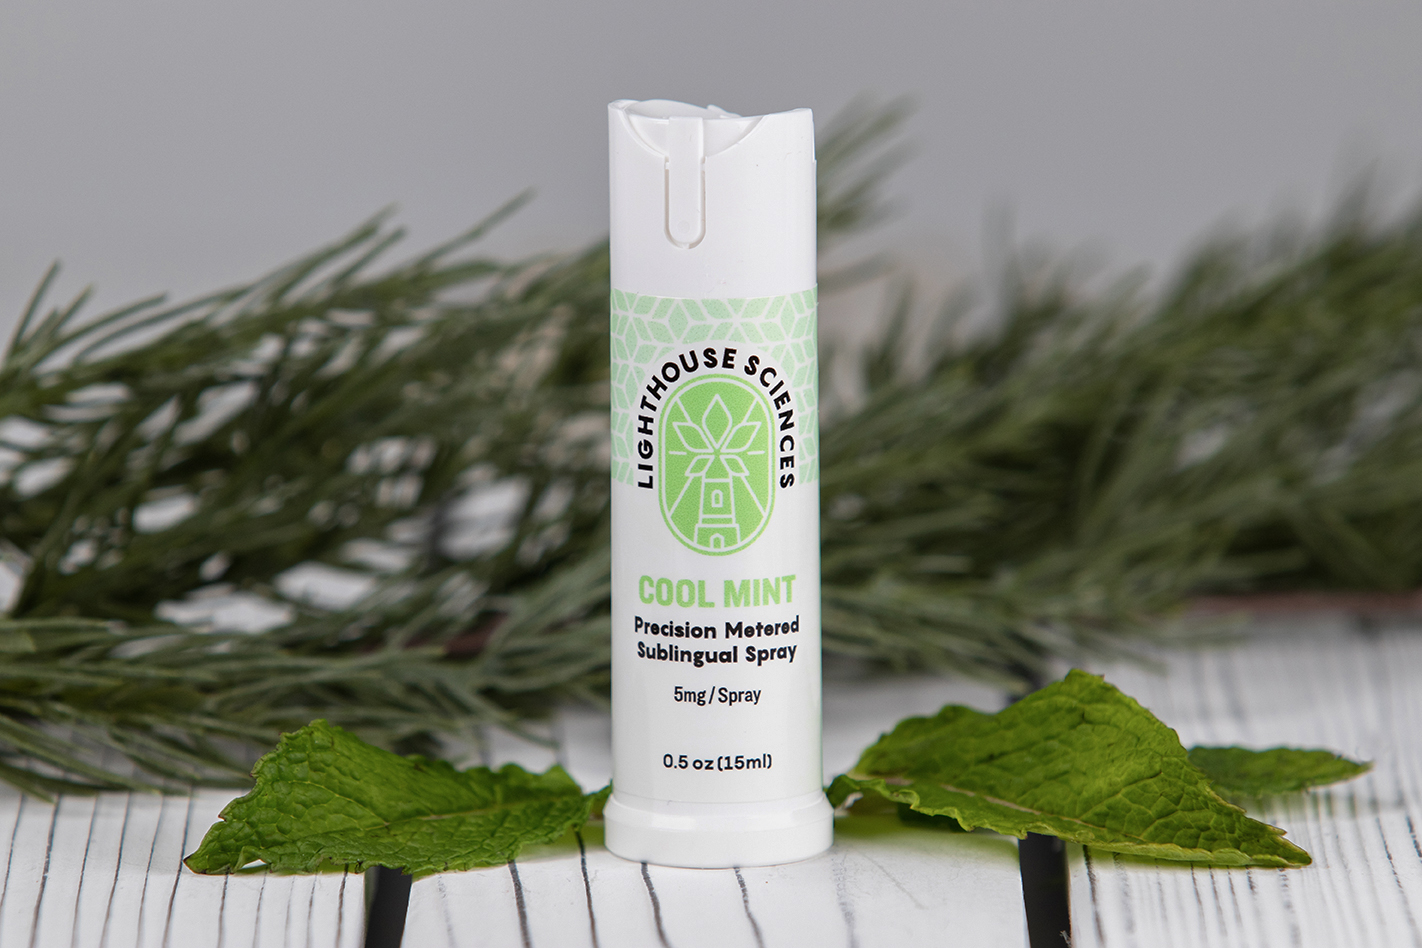 Lighthouse Sciences Cool Mint- Precision Metered Sublingual Spray Bottle surrounded by mint on a wood background